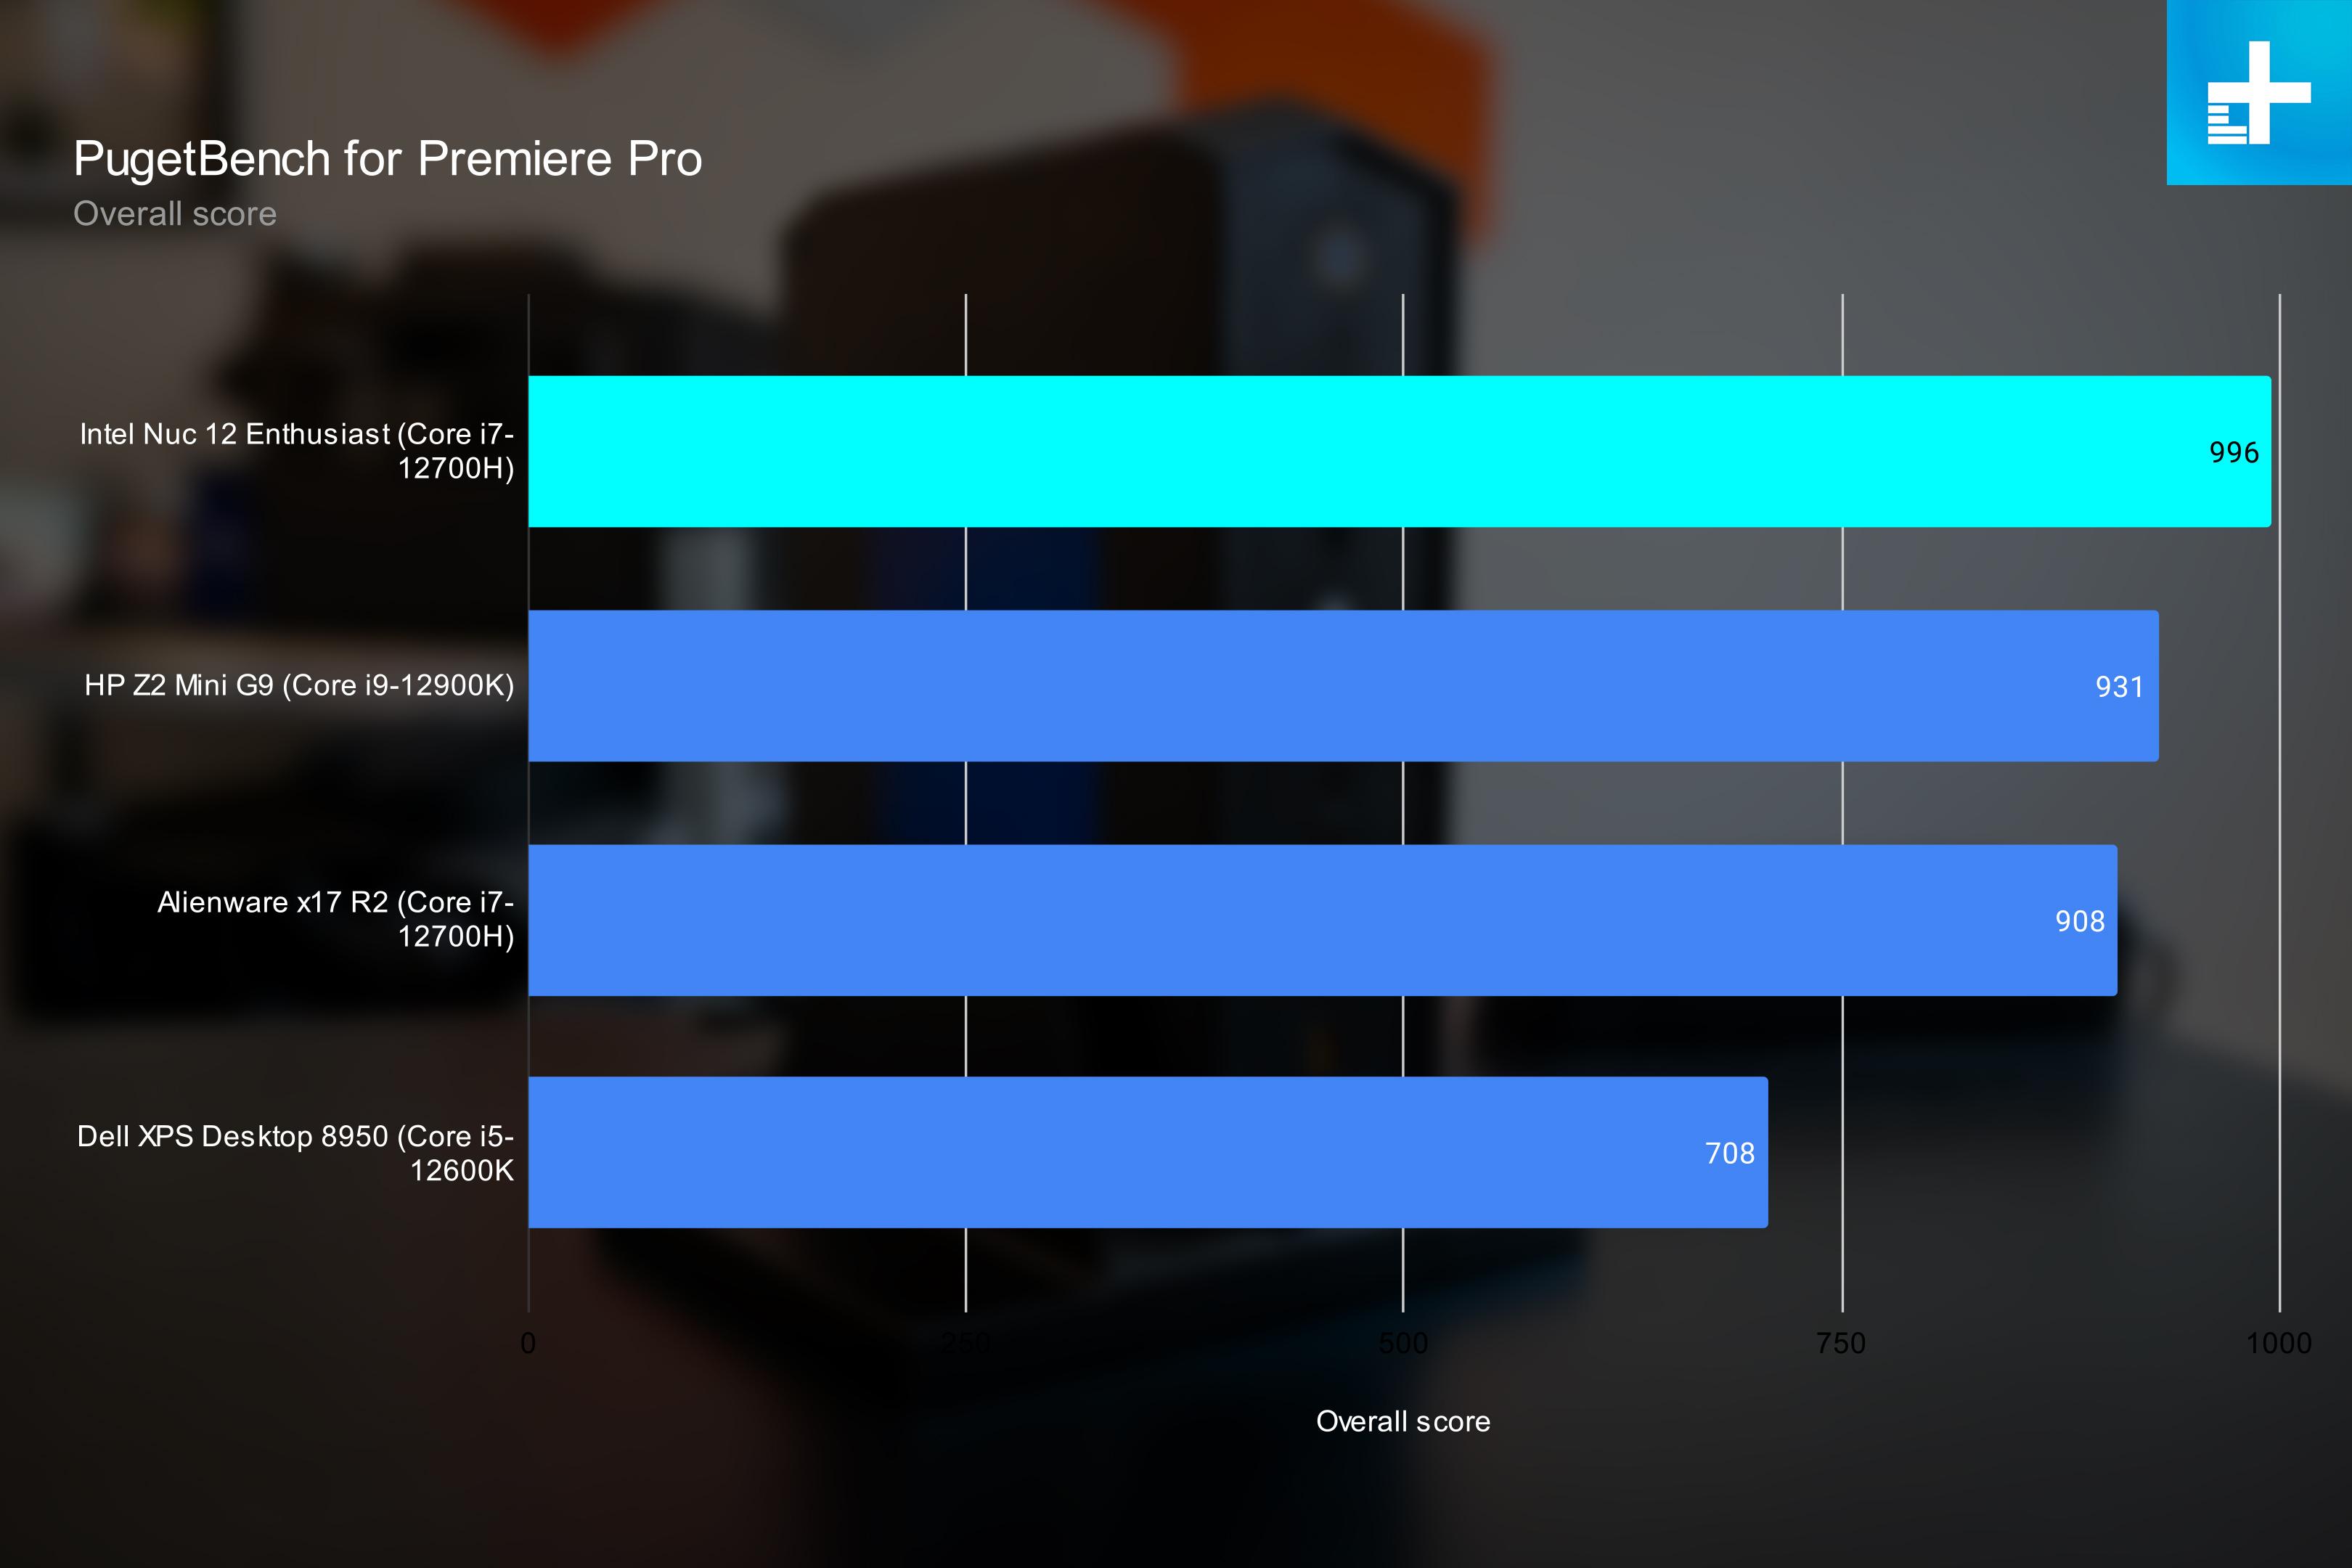 Premiere Pro benchmarks for Intel NUC 12 Enthusiast.